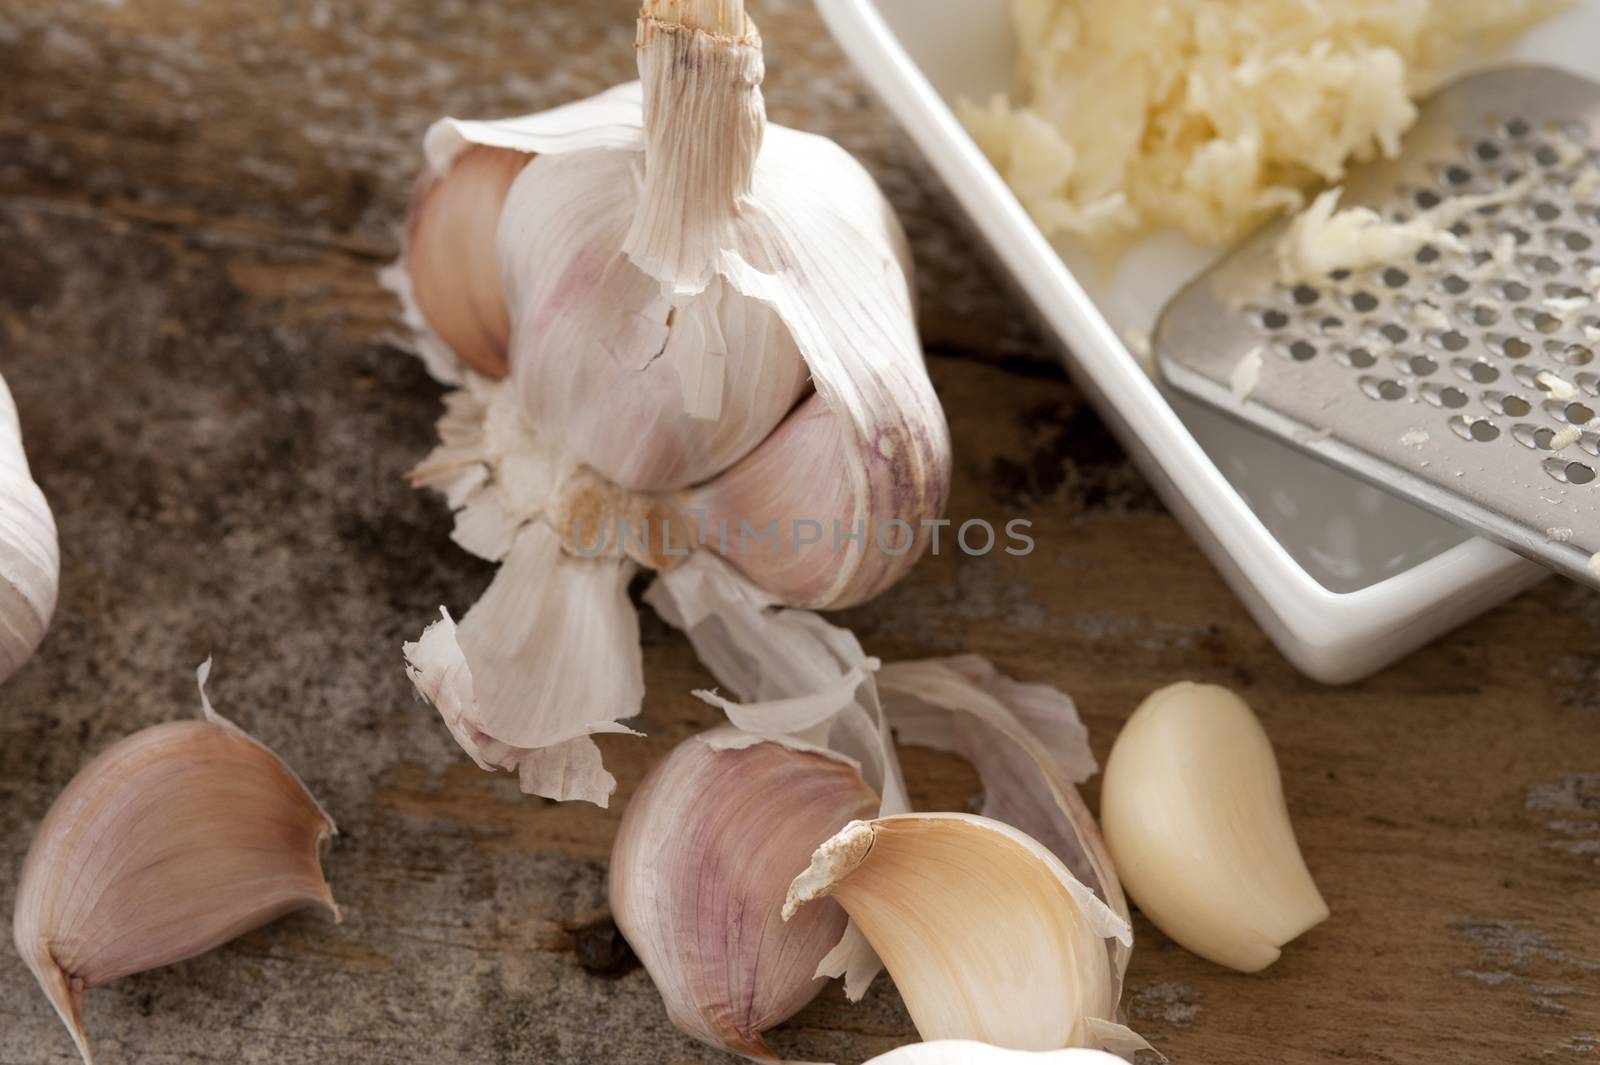 Preparing grated garlic for cooking by stockarch